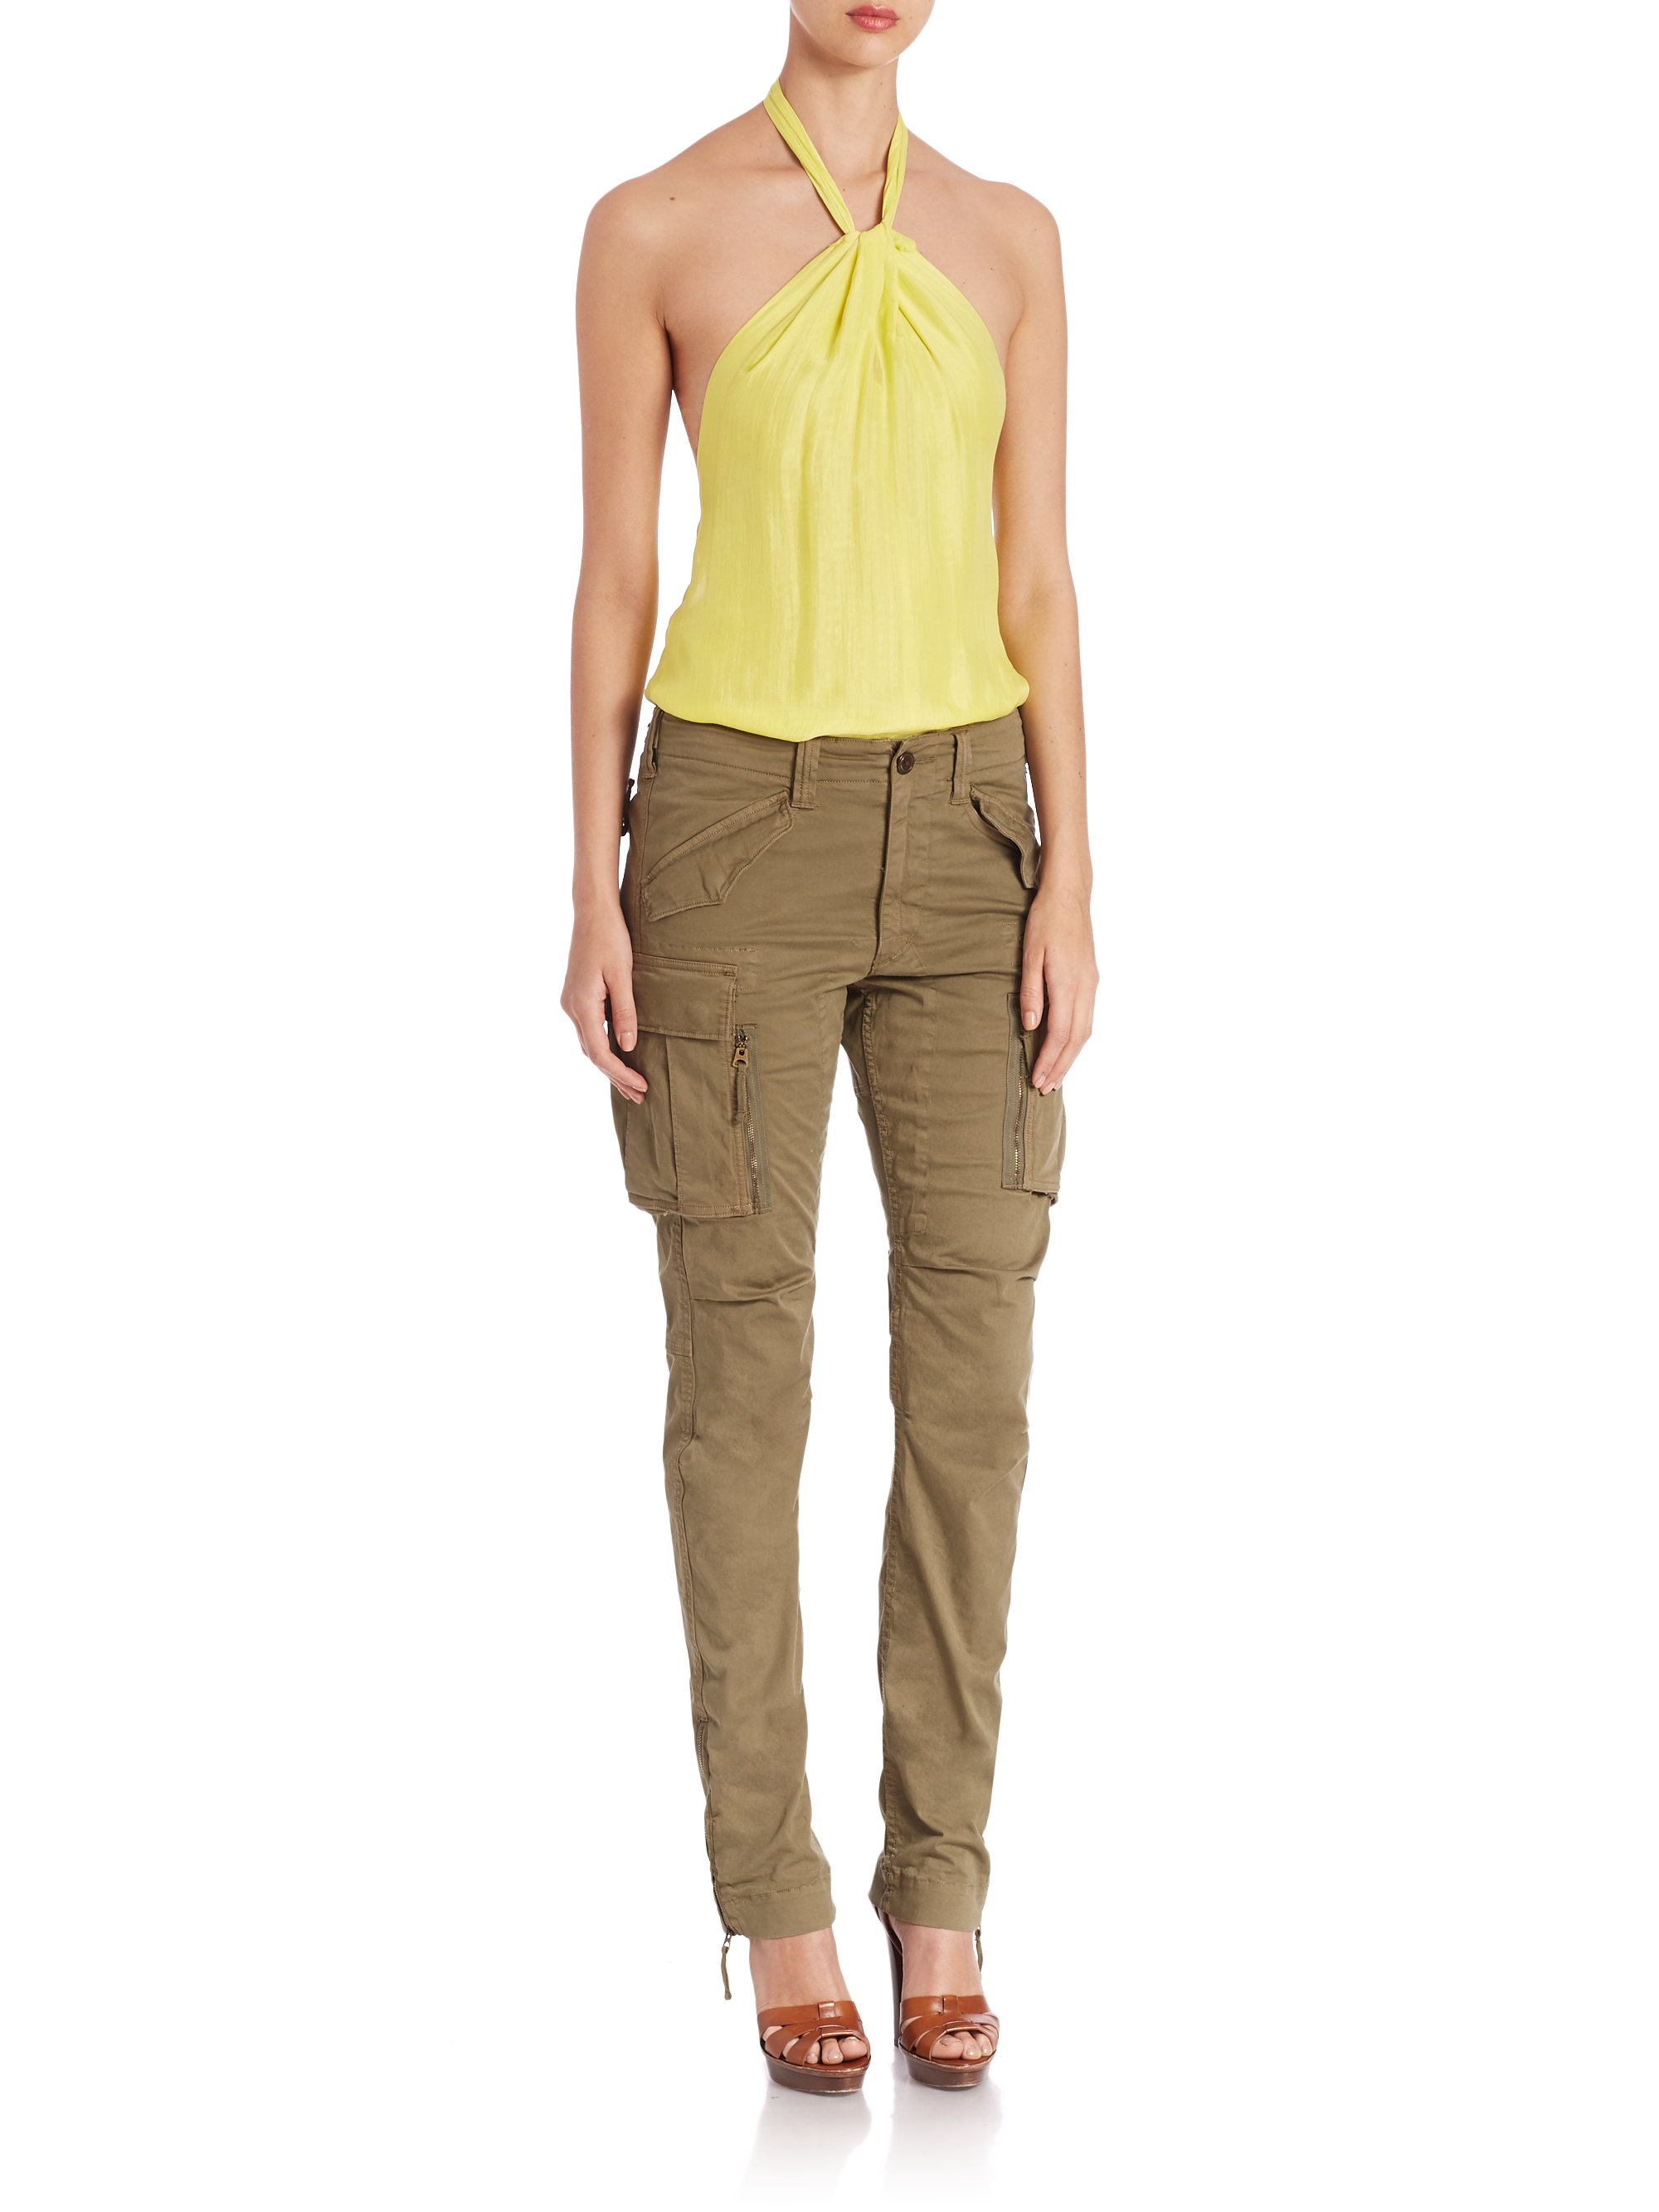 Polo Ralph Lauren Cotton Twill Cargo Skinny Pants in Olive (Green) - Lyst